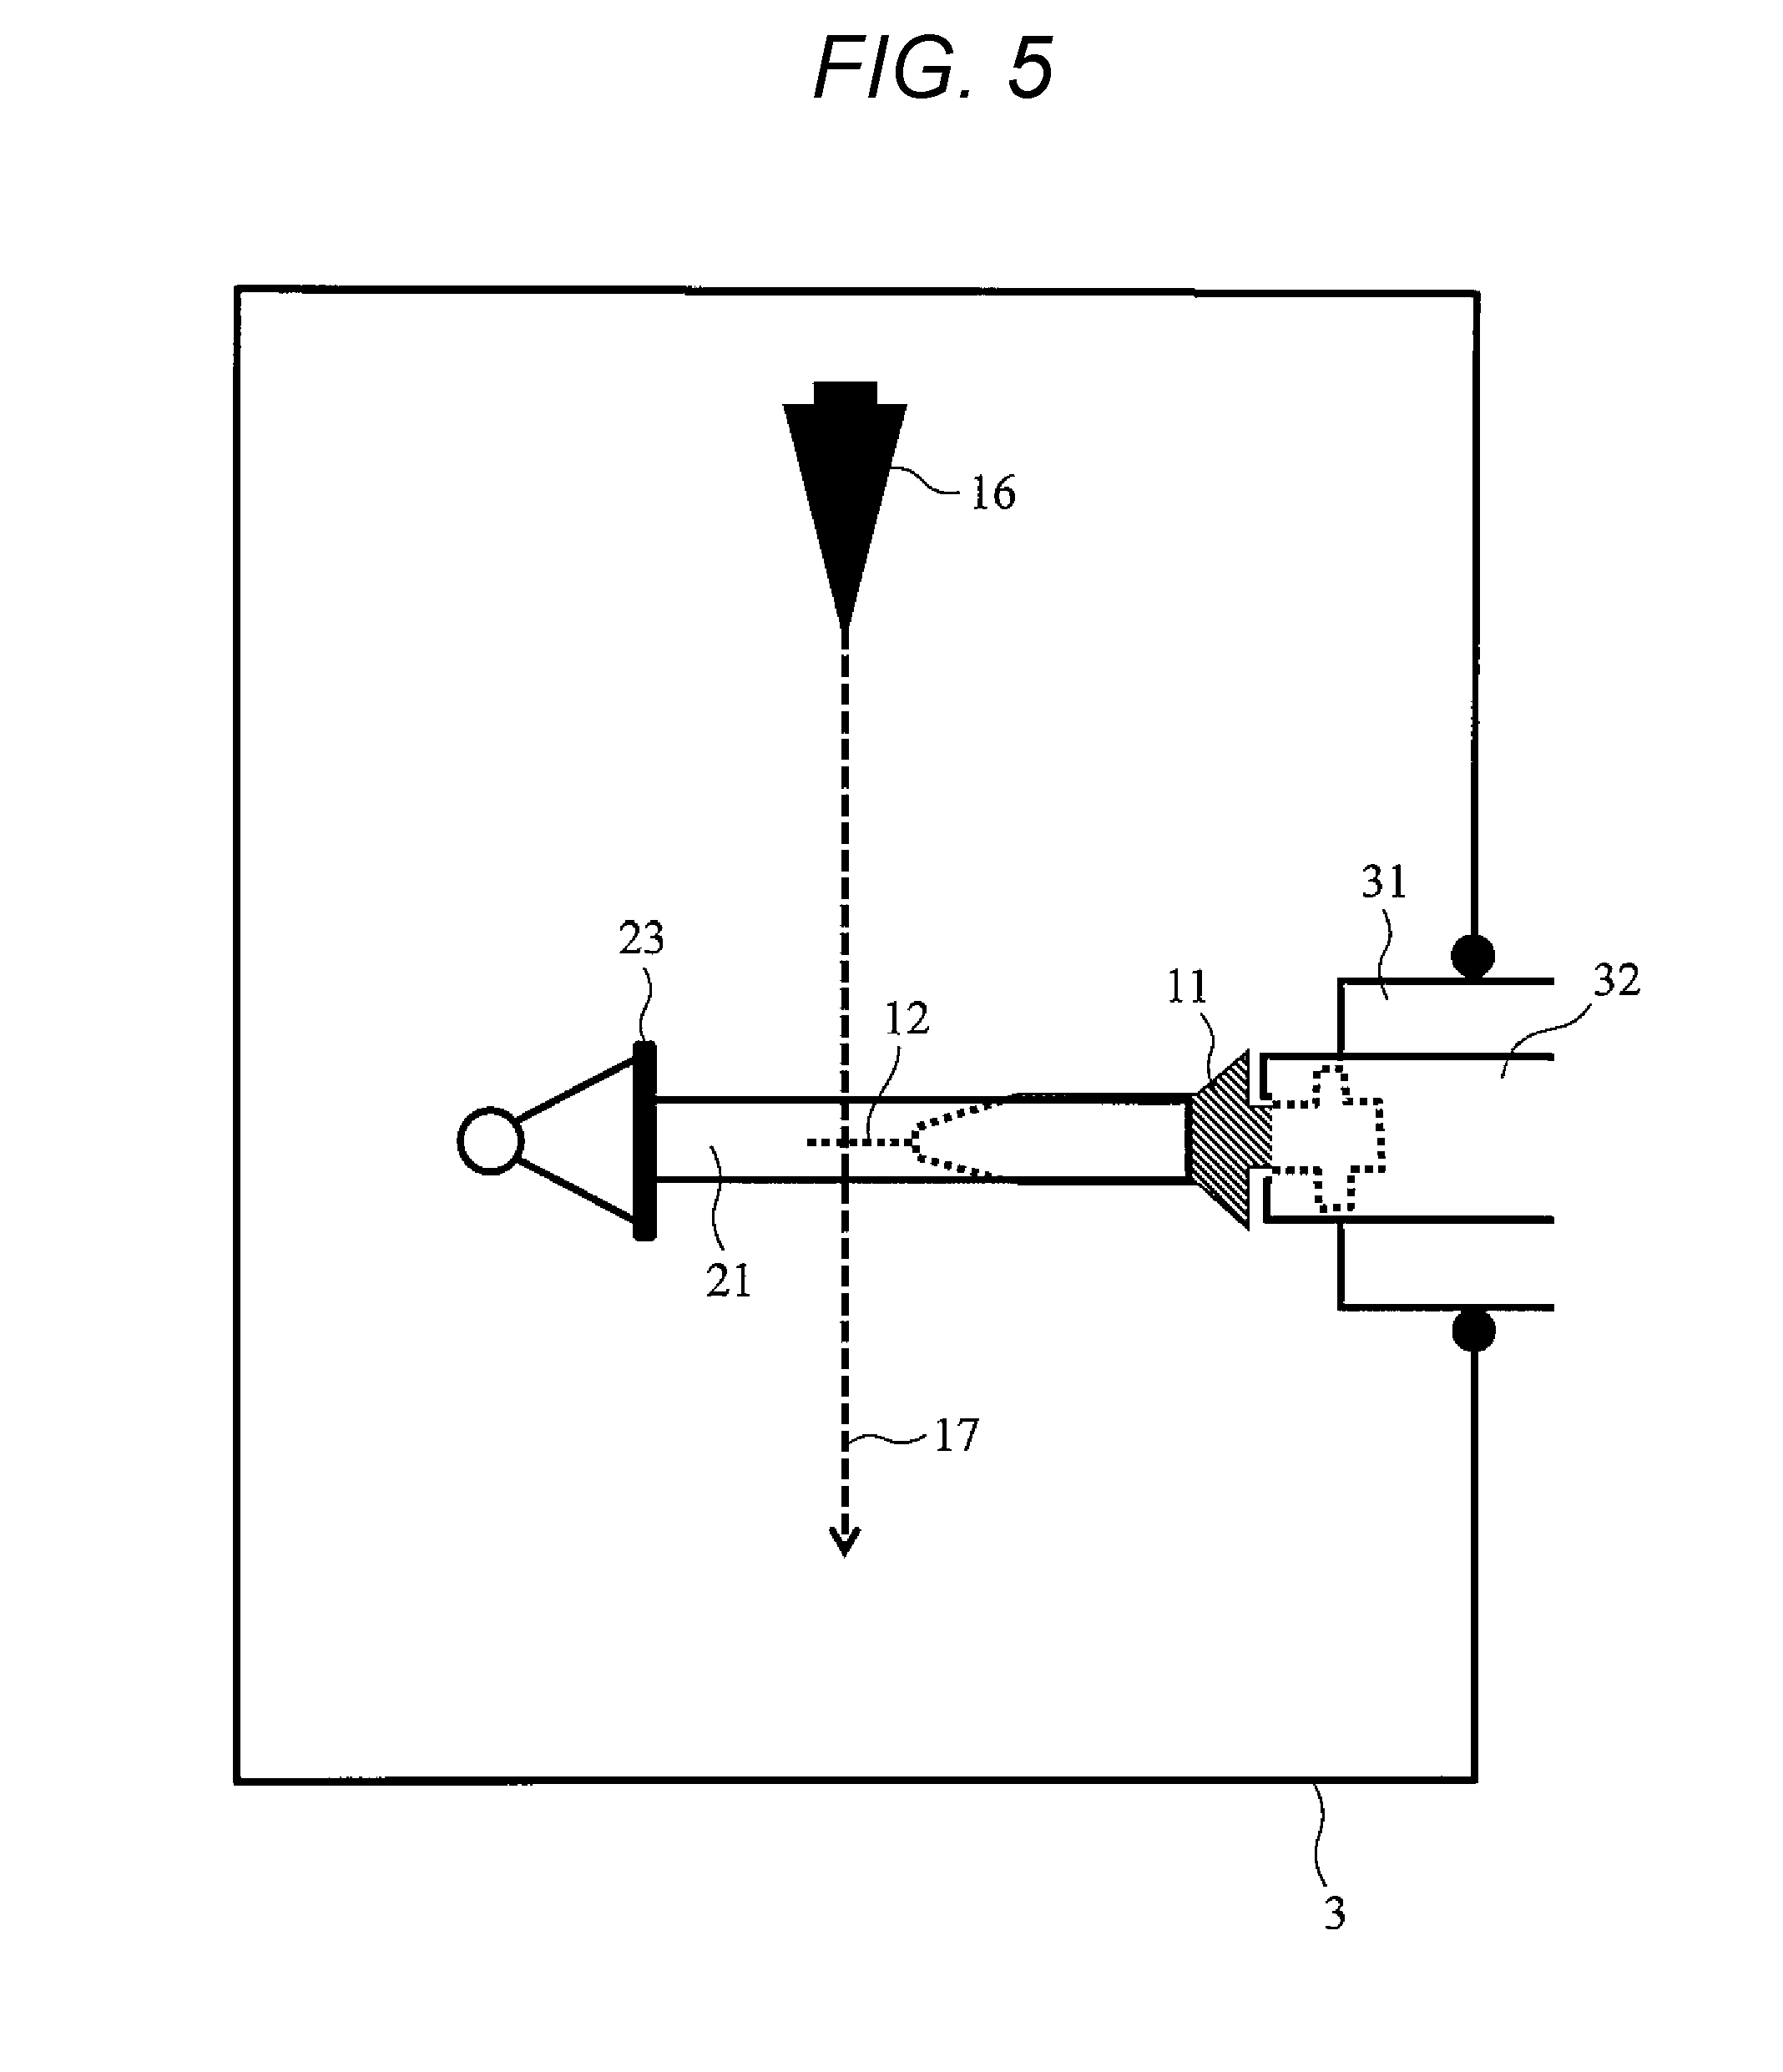 Sample holder and analytical vacuum device